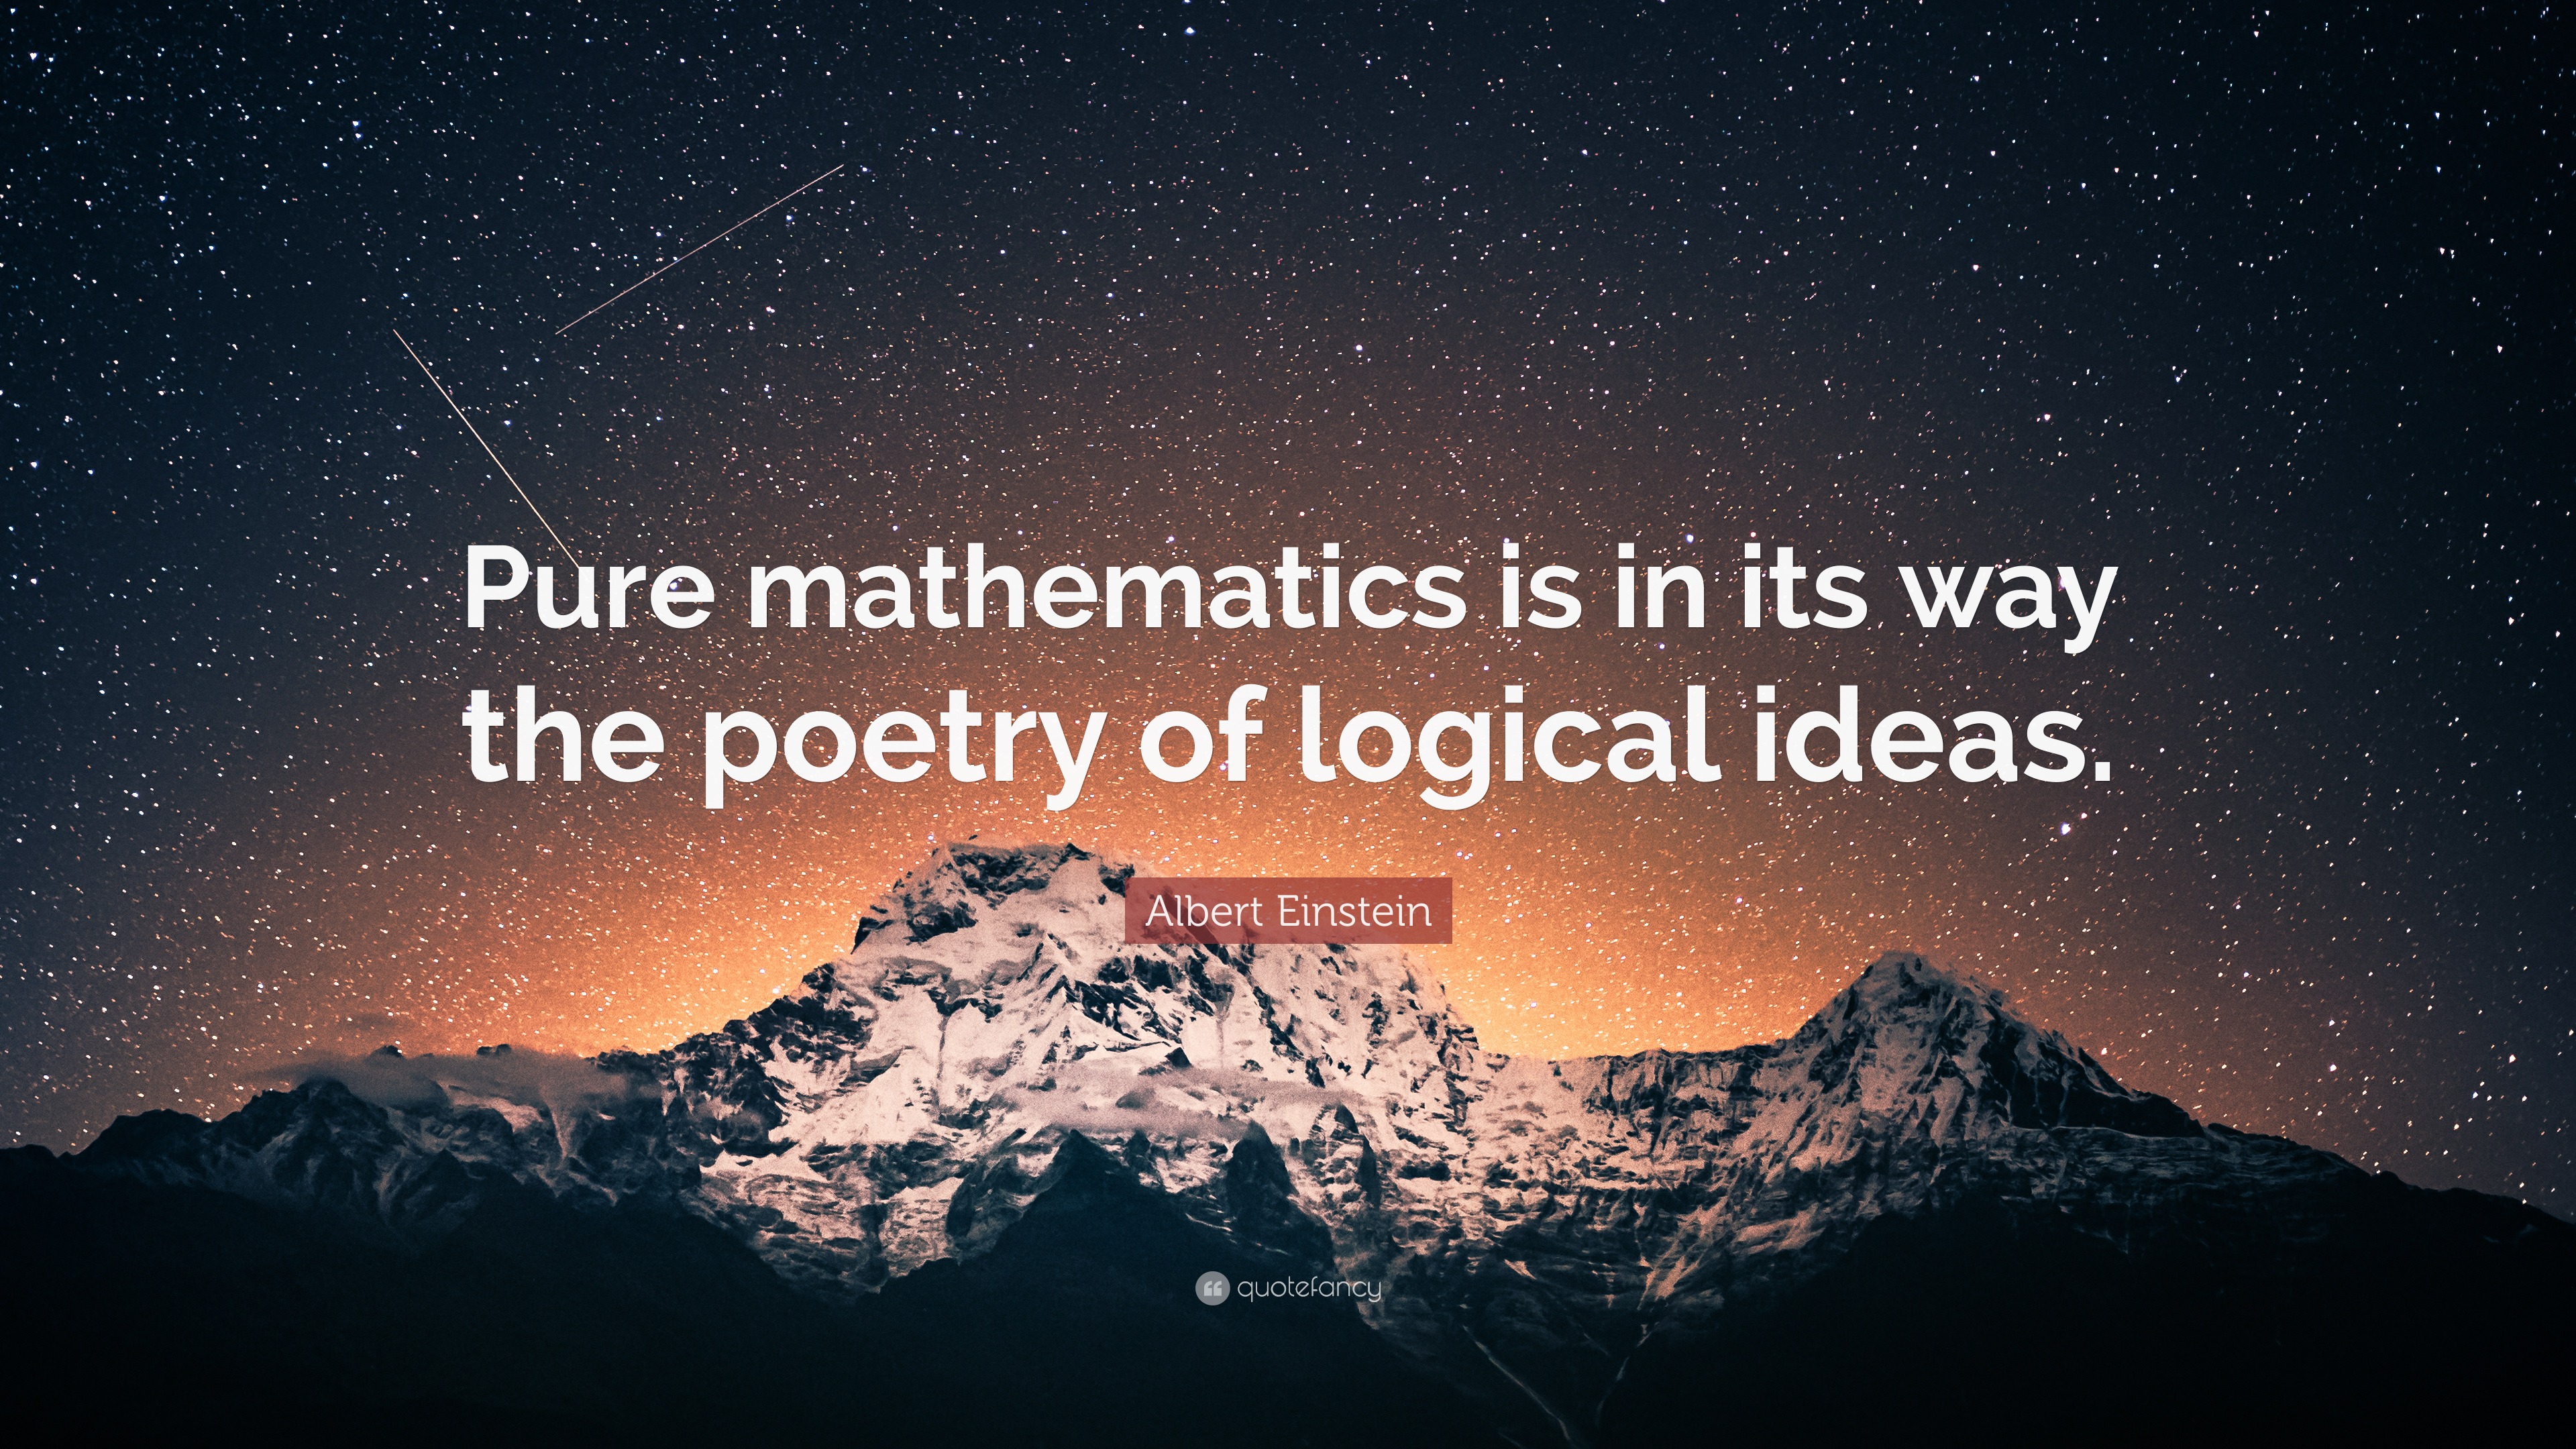 Albert Einstein Quote: “Pure mathematics is in its way the poetry of